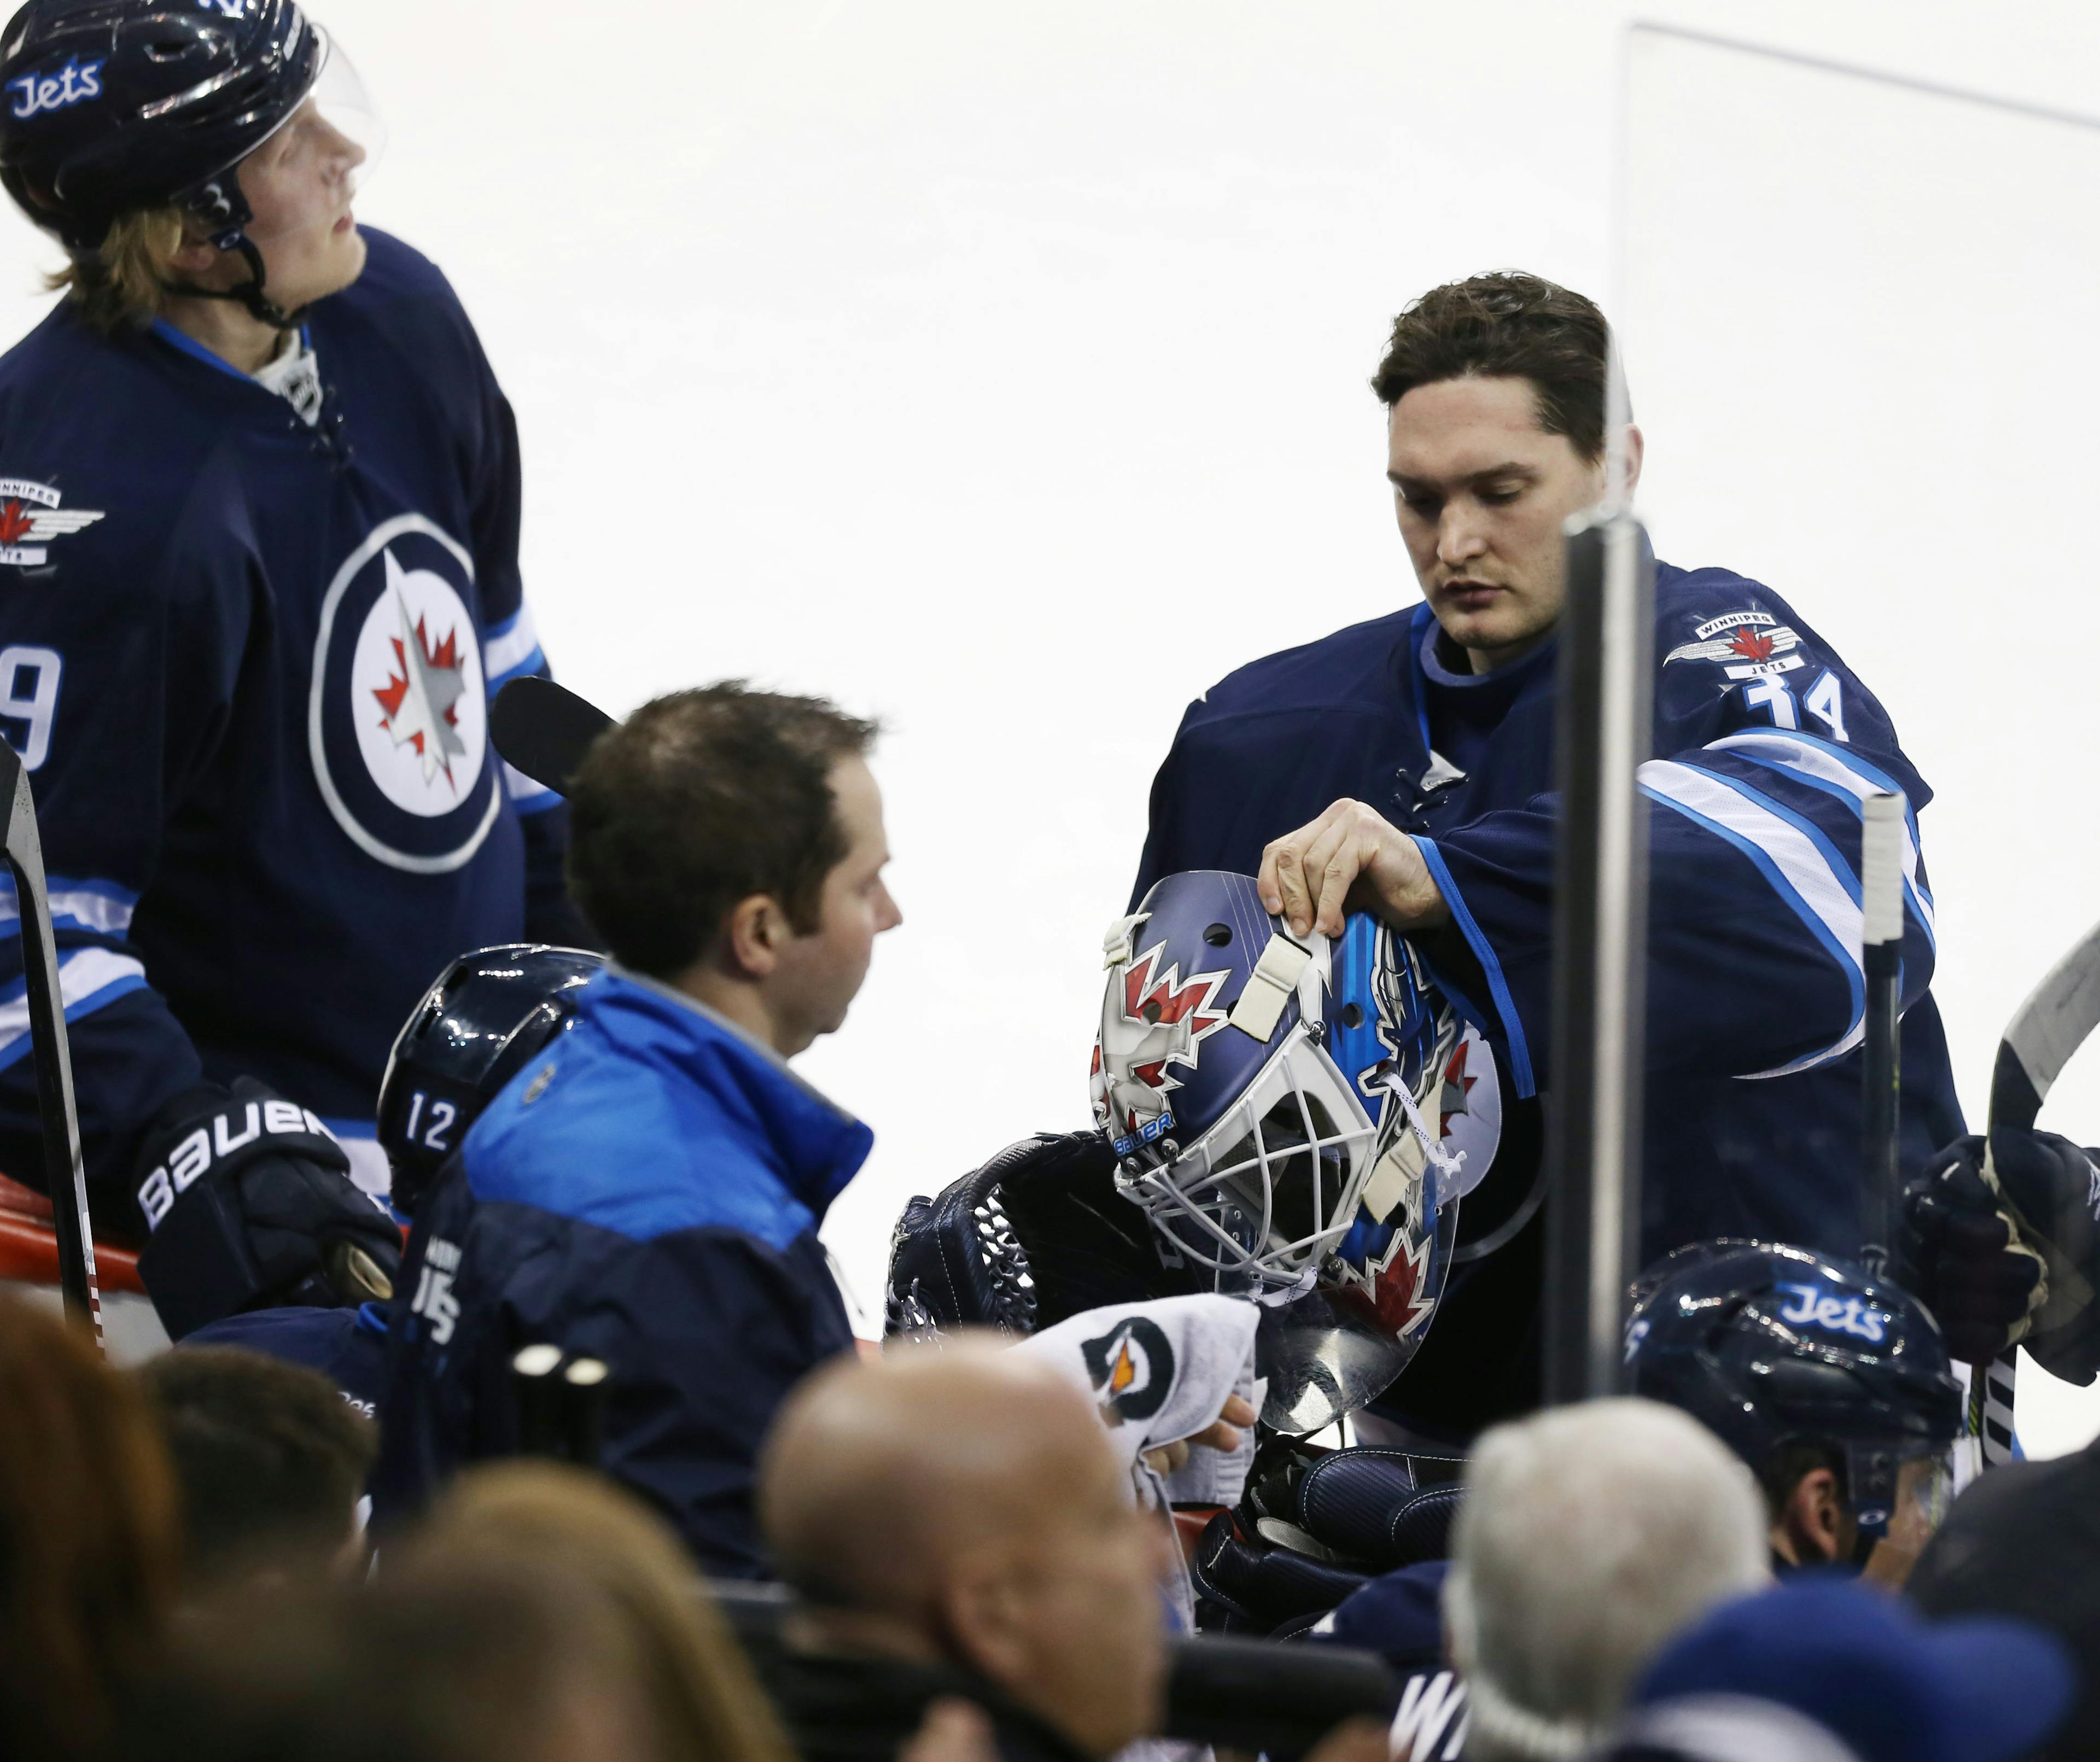 Winnipeg Jets goalie Michael Hutchinson (34) prepares to head to the net to replace Winnipeg Jets goalie Connor Hellebuyck (37) during the second period against the Minnesota Wild at MTS Centre.